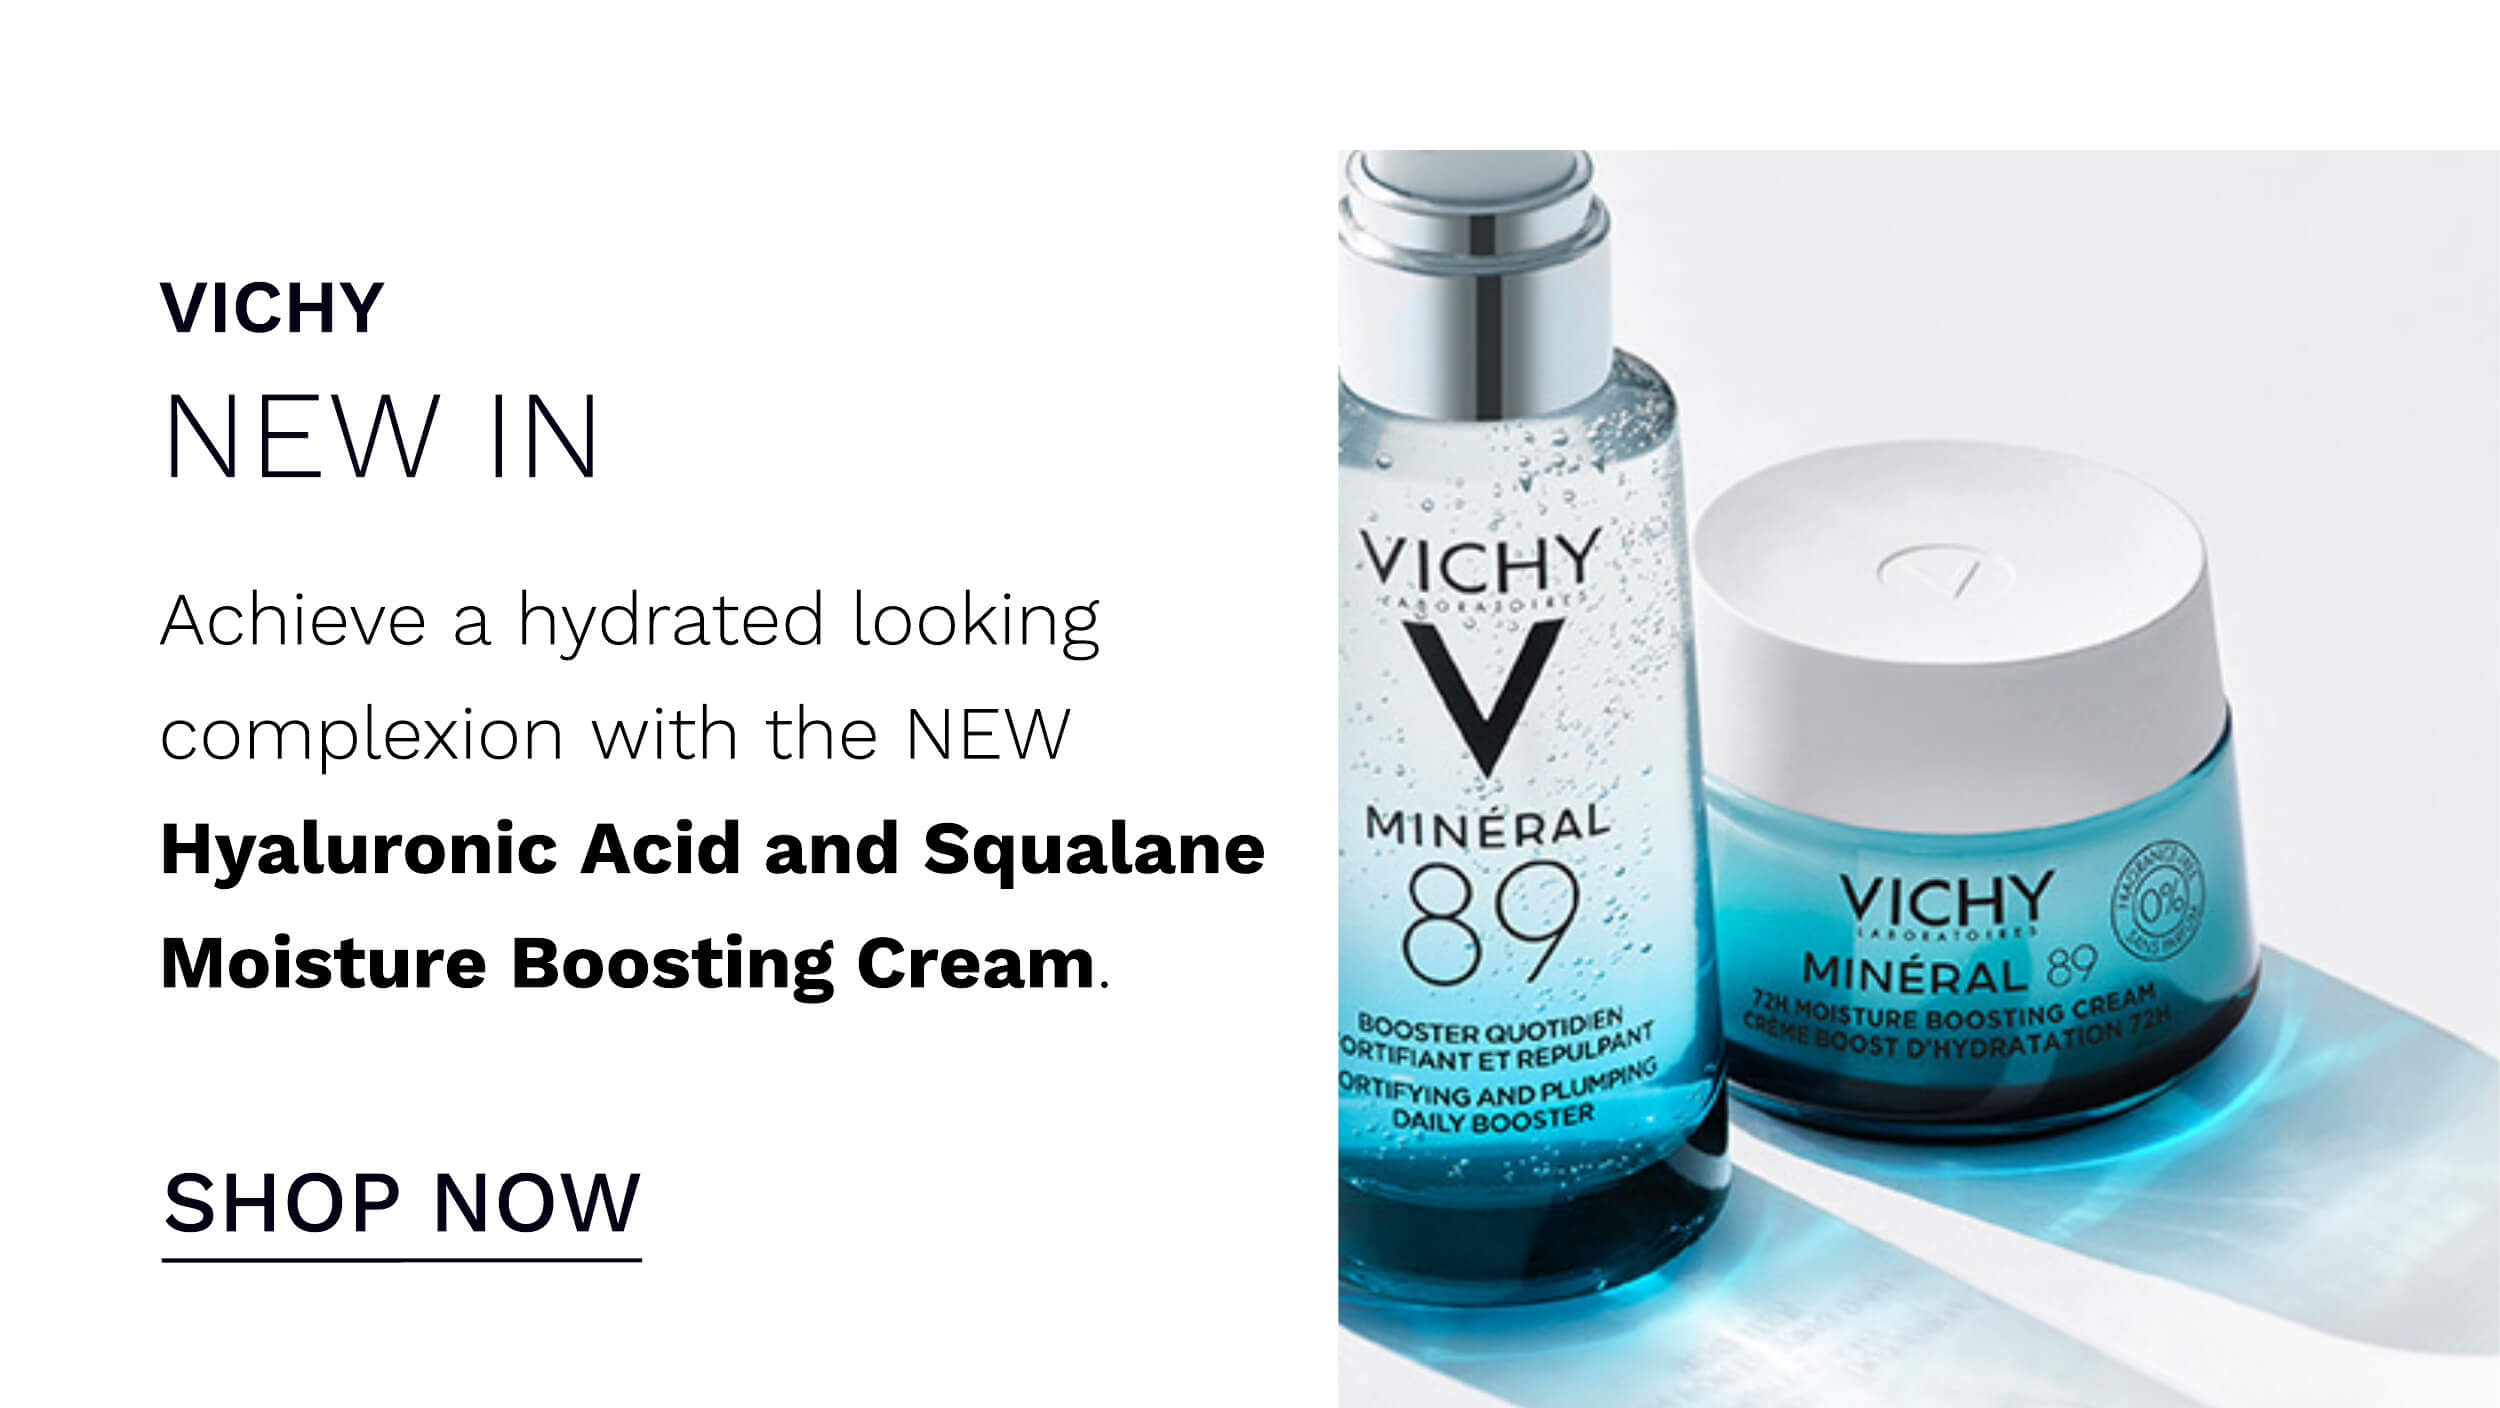 VICHY f NEW IN A Vv Y Achieve a hydrated looking v complexion with the NEW Hyaluronic Acid and Squalane INERA Moisture Boosting Cream. SHOP NOW 